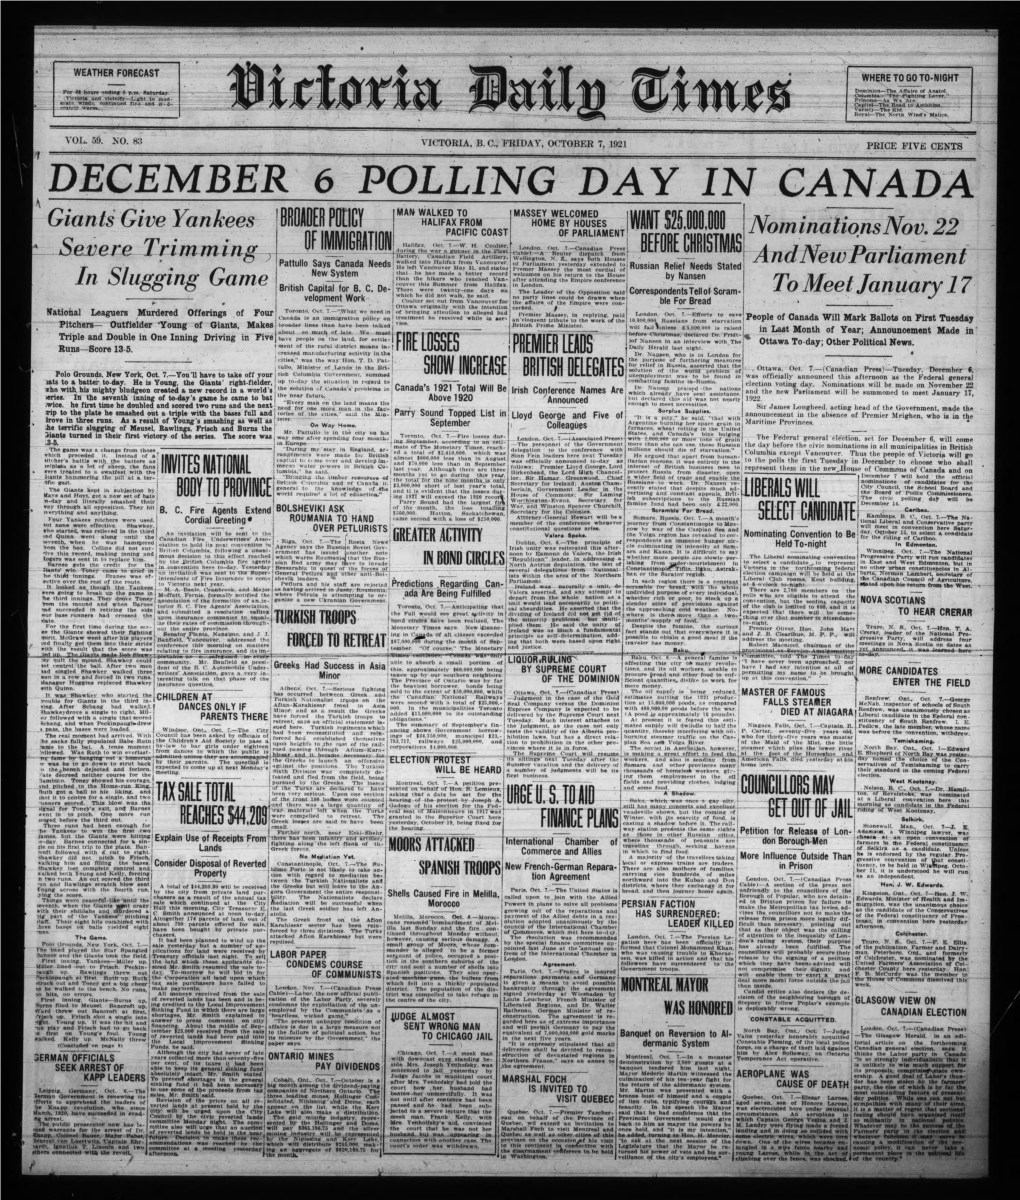 DECEMBER 6 POLLING DAY in CANADA MAN WALKED to MASSEY WELCOMED Giants Give Yankees HALIFAX from HOME by HOUSES PACIFIC COAST of PARLIAMENT Nominations Nov